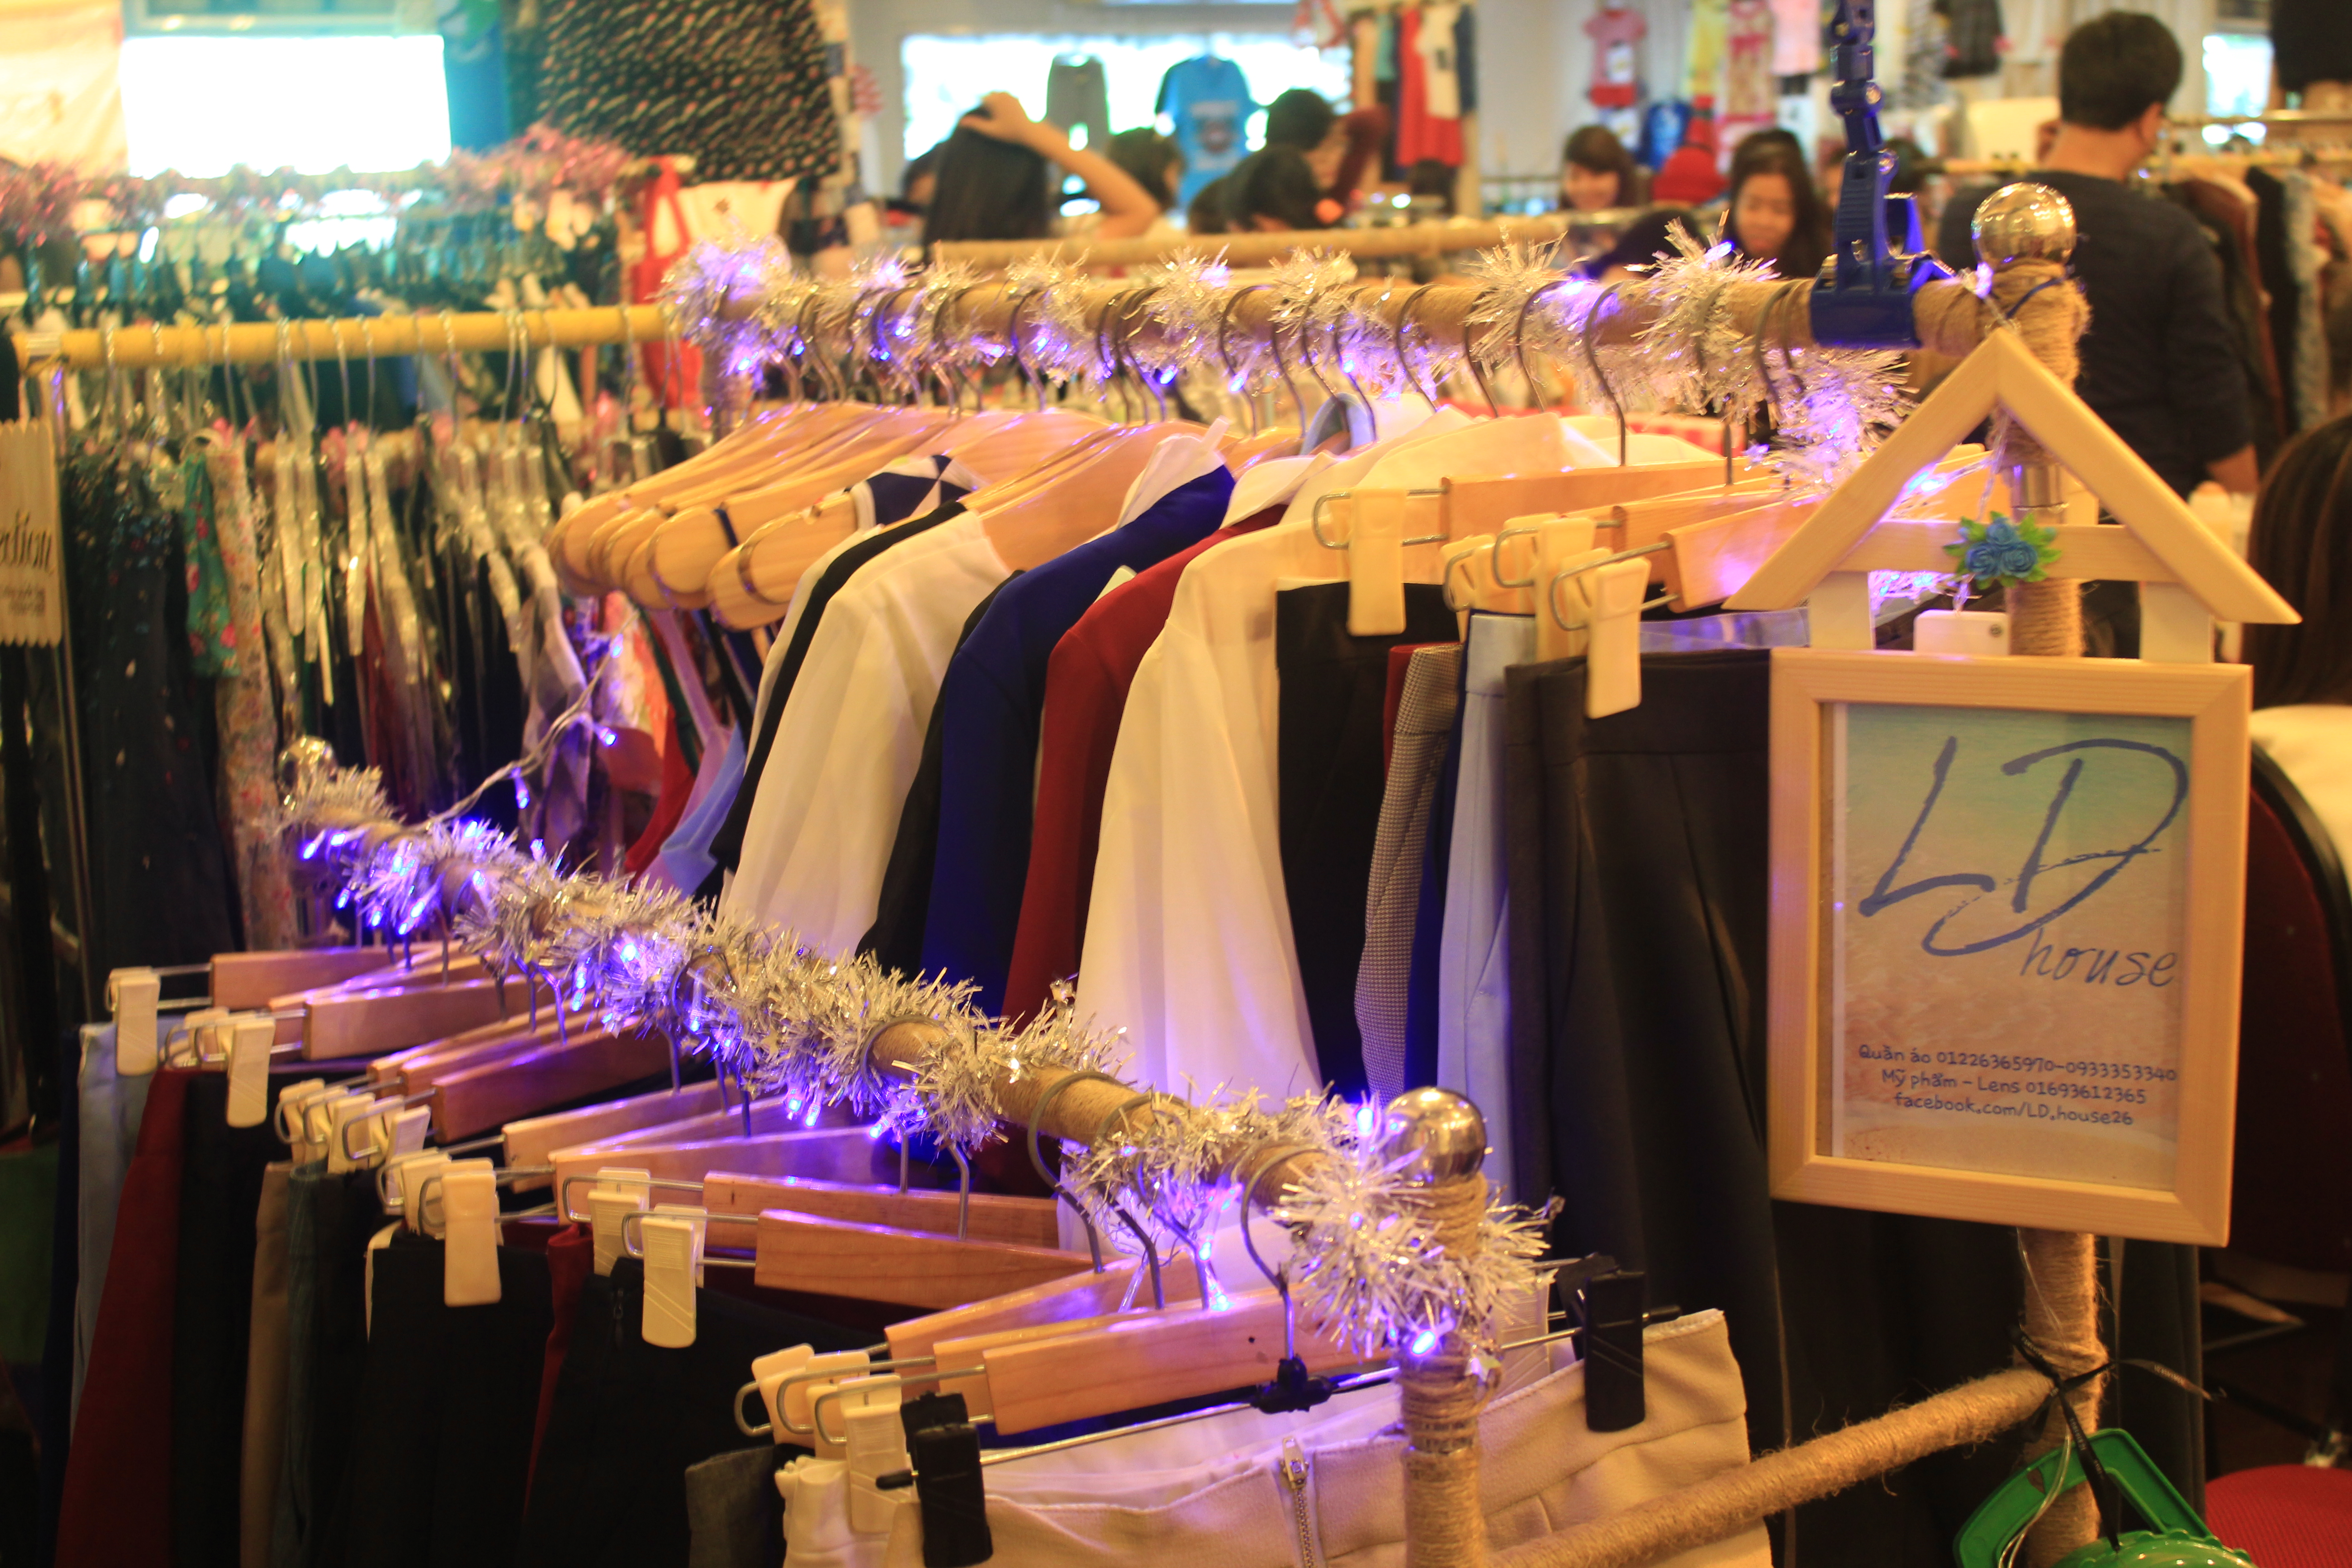 A clothing booth decorated with silver decorative wires at the 1Spot flea market in District 1, Ho Chi Minh City, on December 20, 2014.